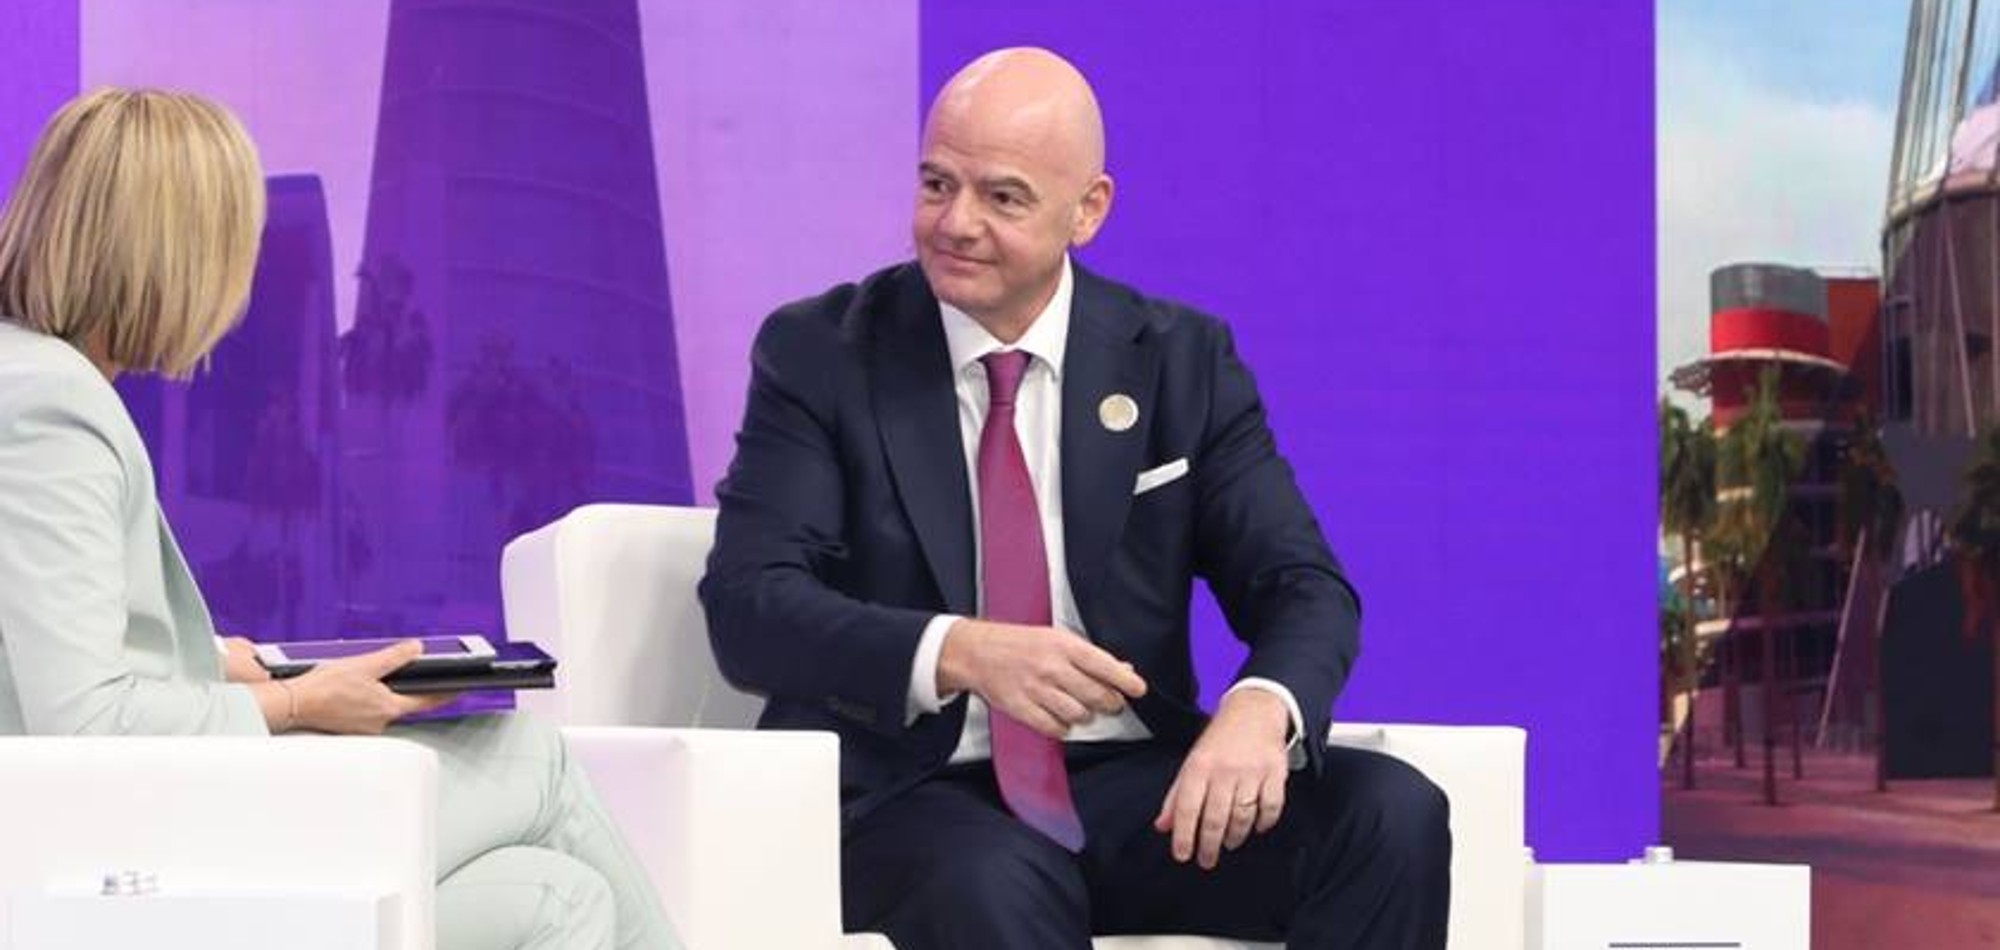 World Cup Qatar 2022 Will Be an Exceptional Event, says Infantino 